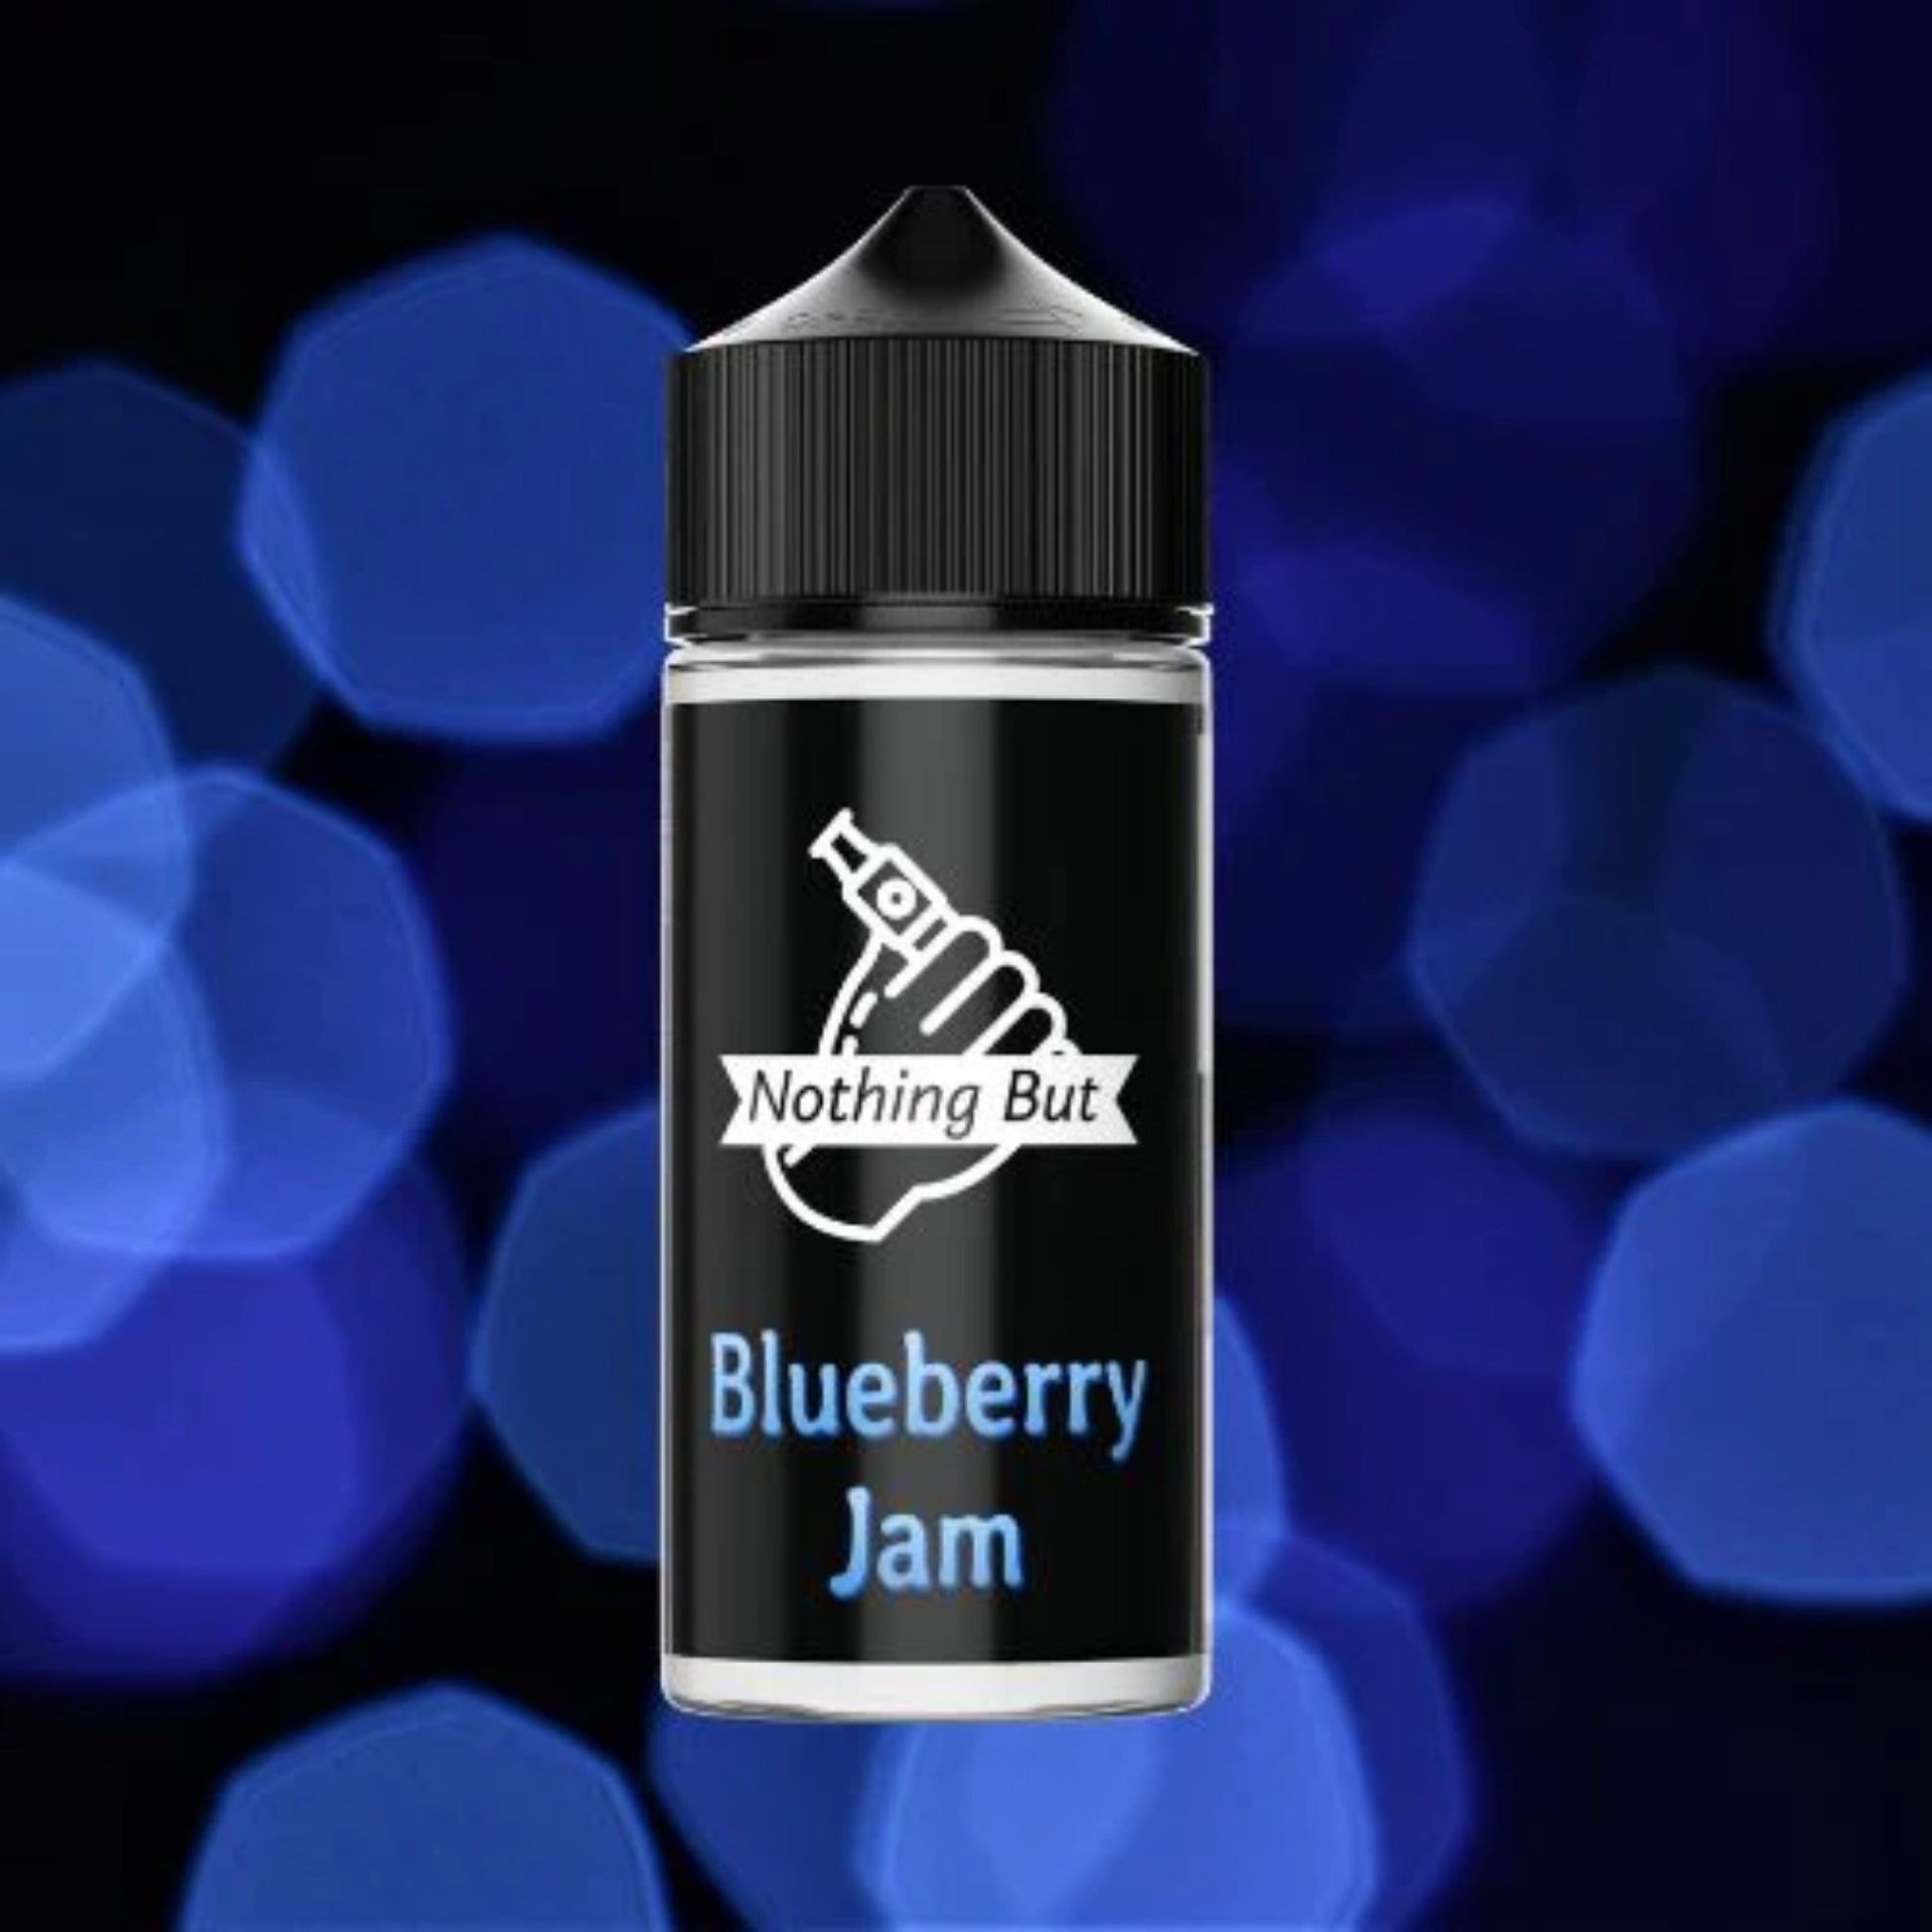 Nothing But | Blueberry Jam | 120ml bottle with black and blue background